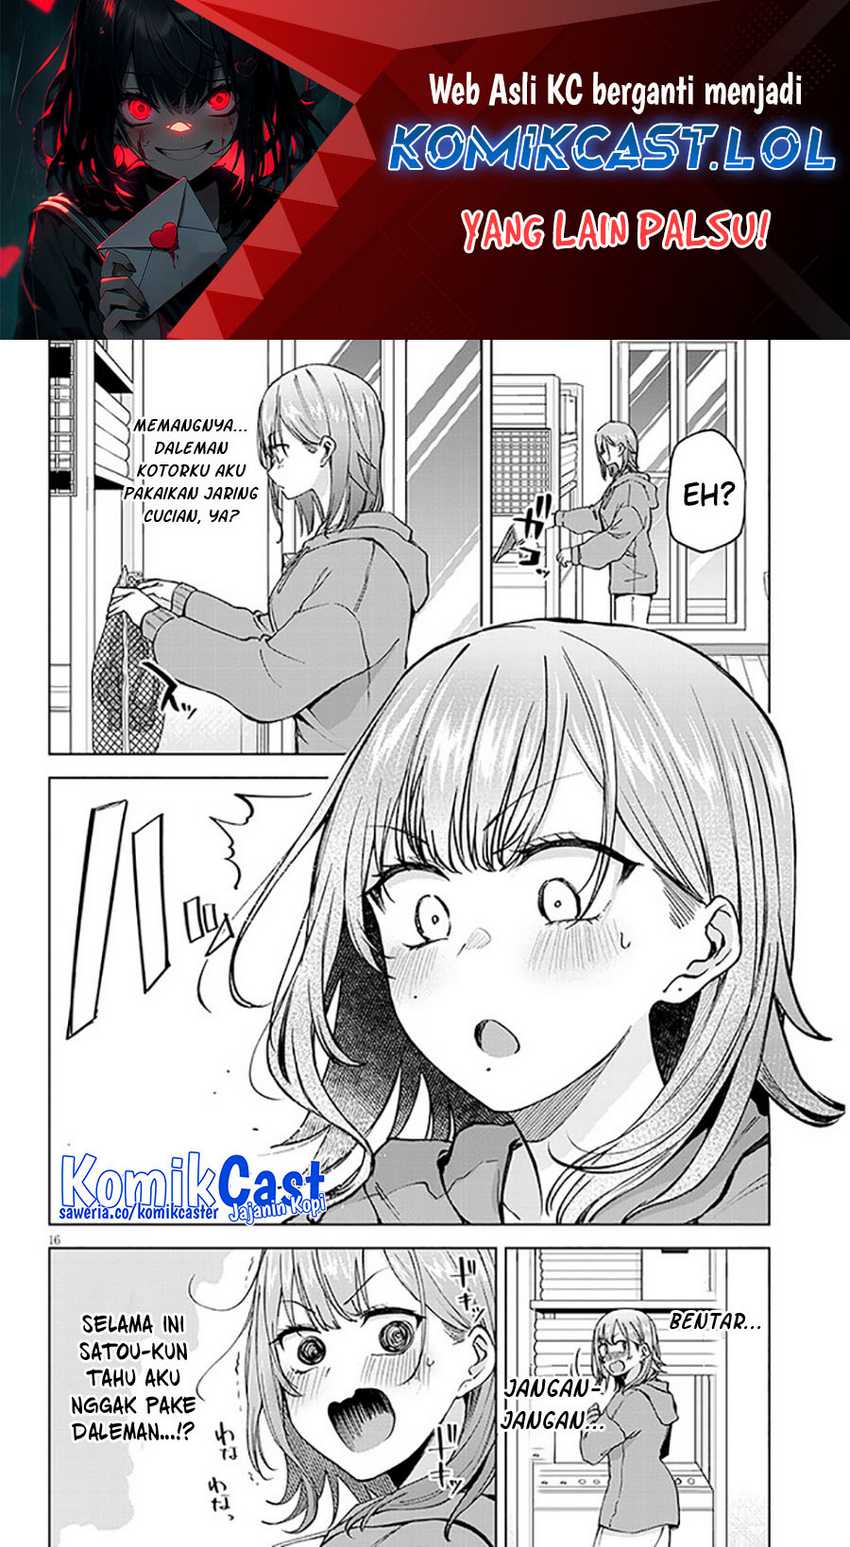 Will You Marry Me If I Quit Being an Idol?! Chapter 04.2